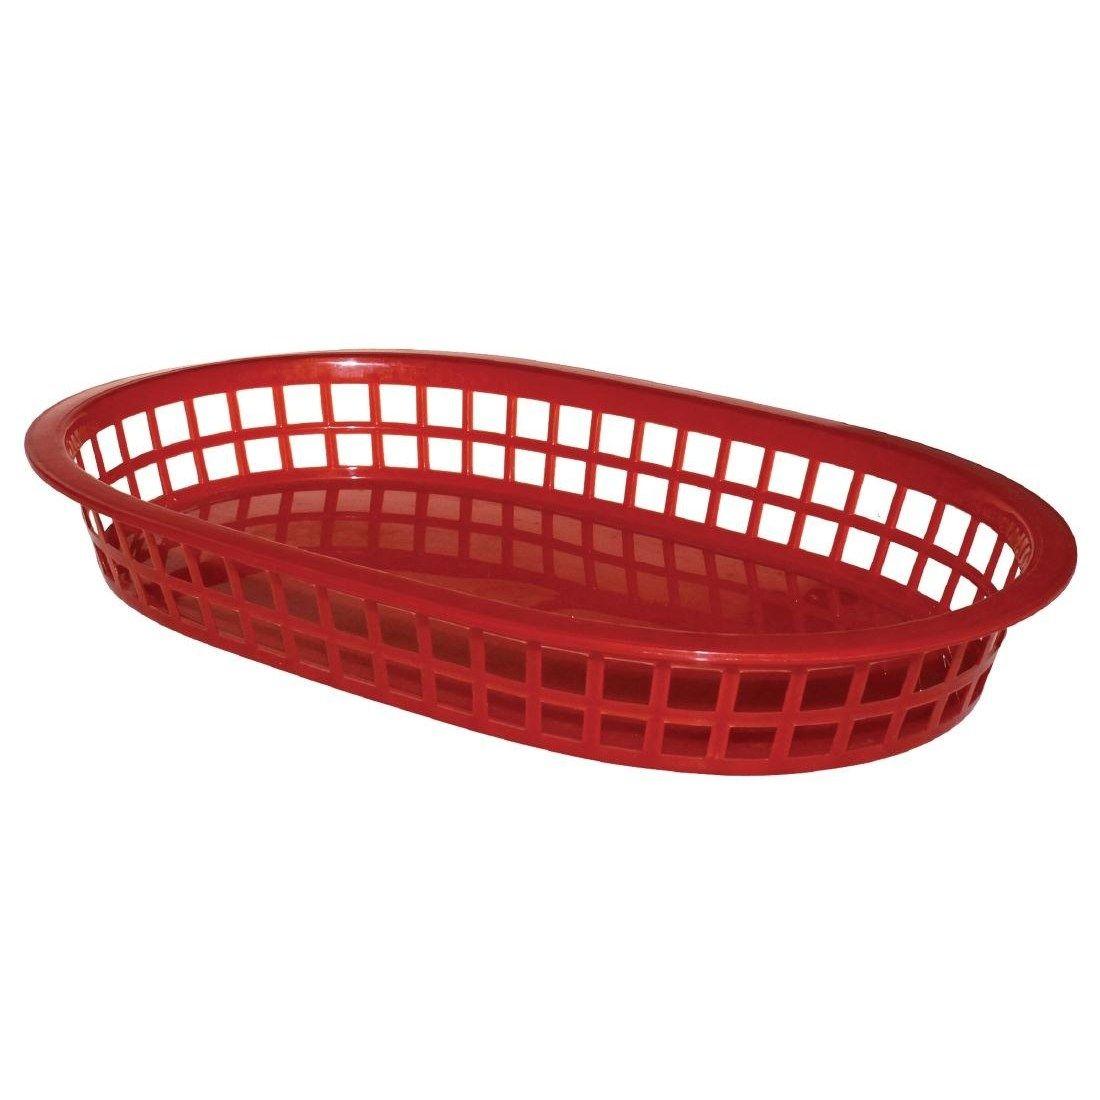 Food with Red Oval Logo - Oval Polypropylene Food Basket Red - Whitco